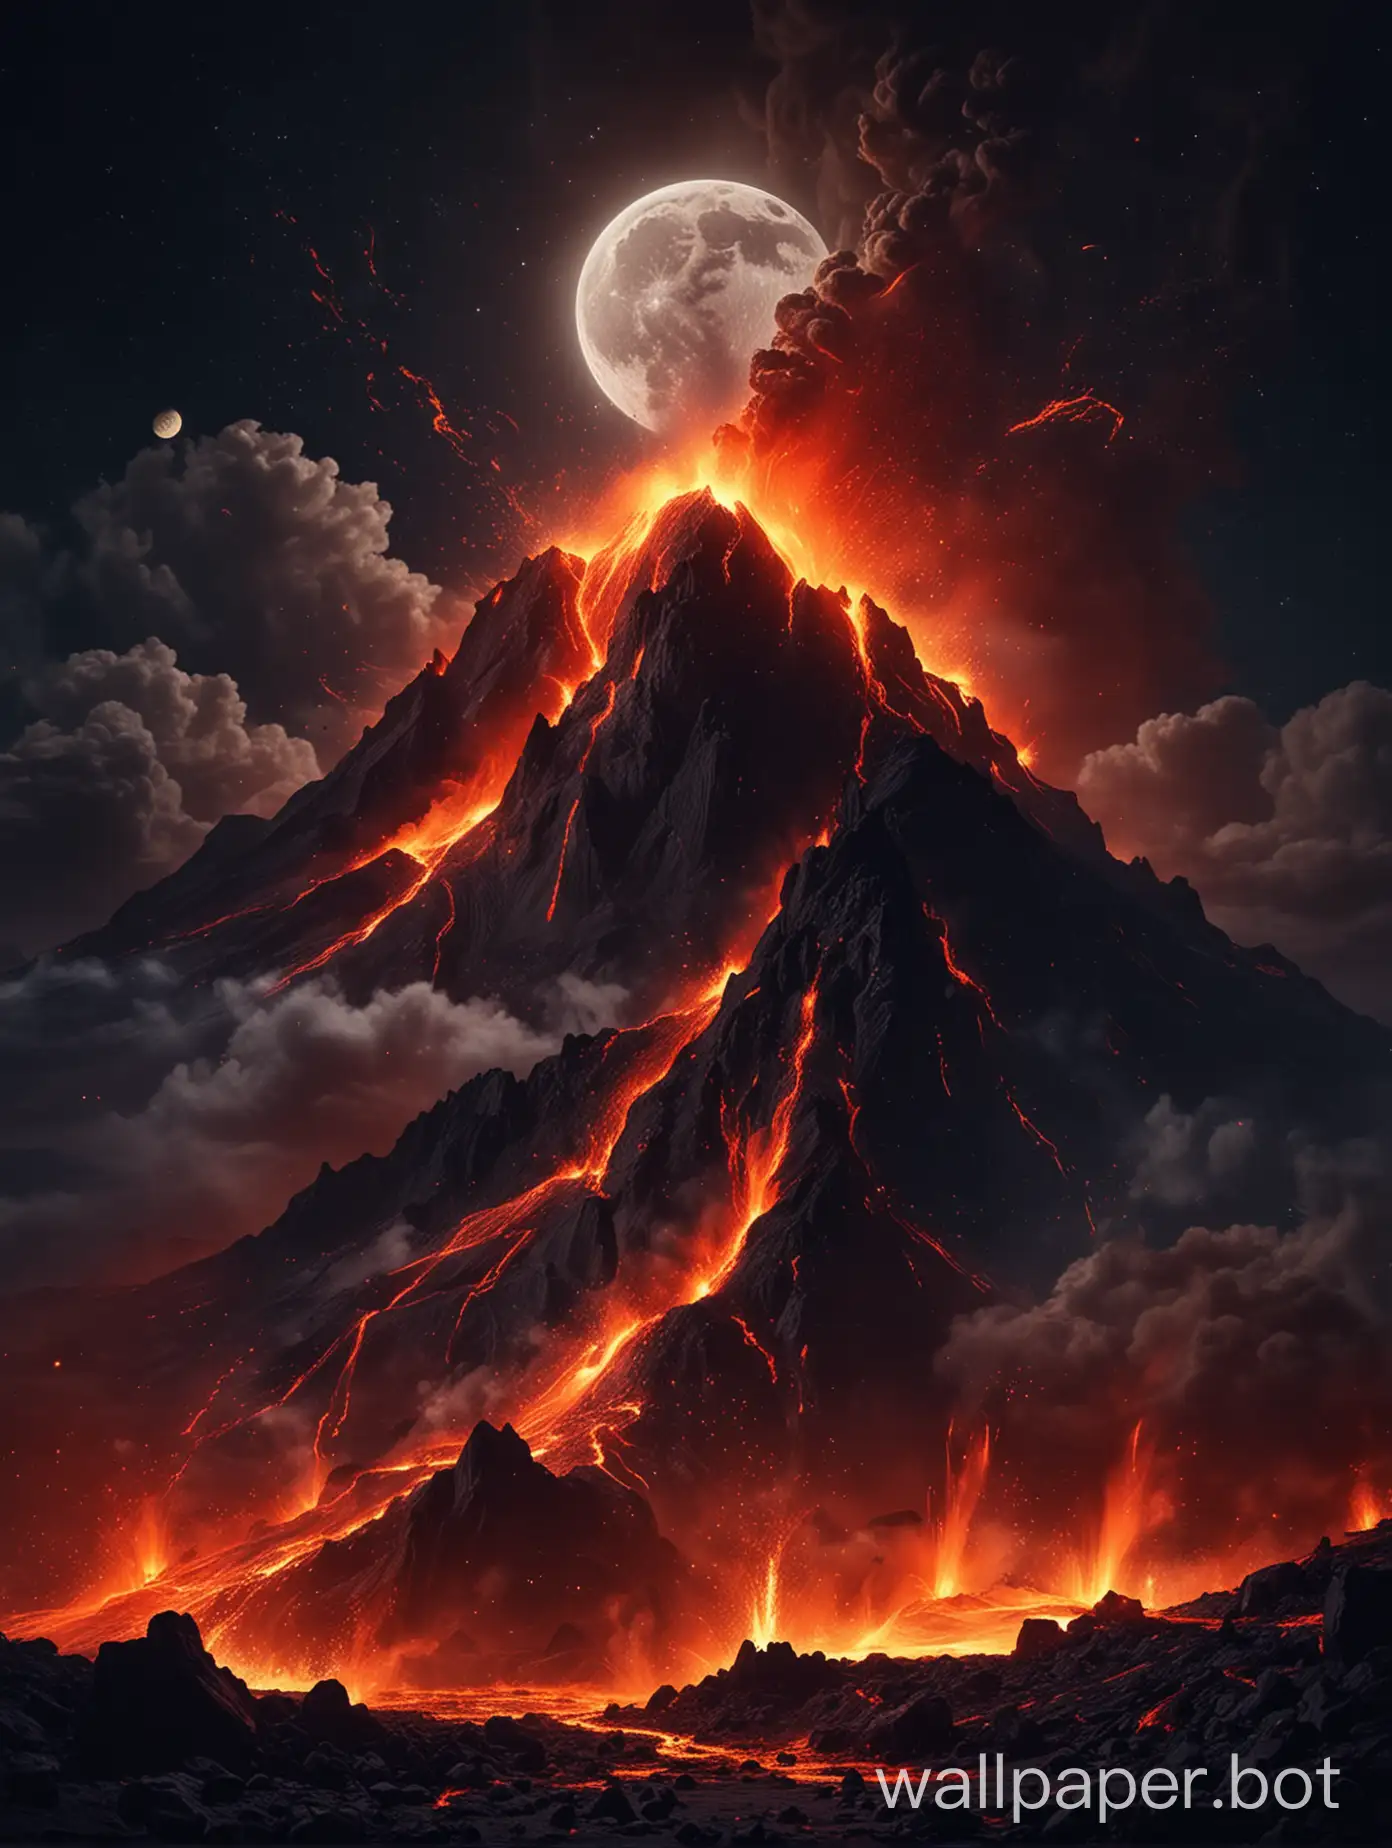 eruption of a huge volcano, lava flows down the mountain slope, moon shines brightly, firey comets fall from the sky